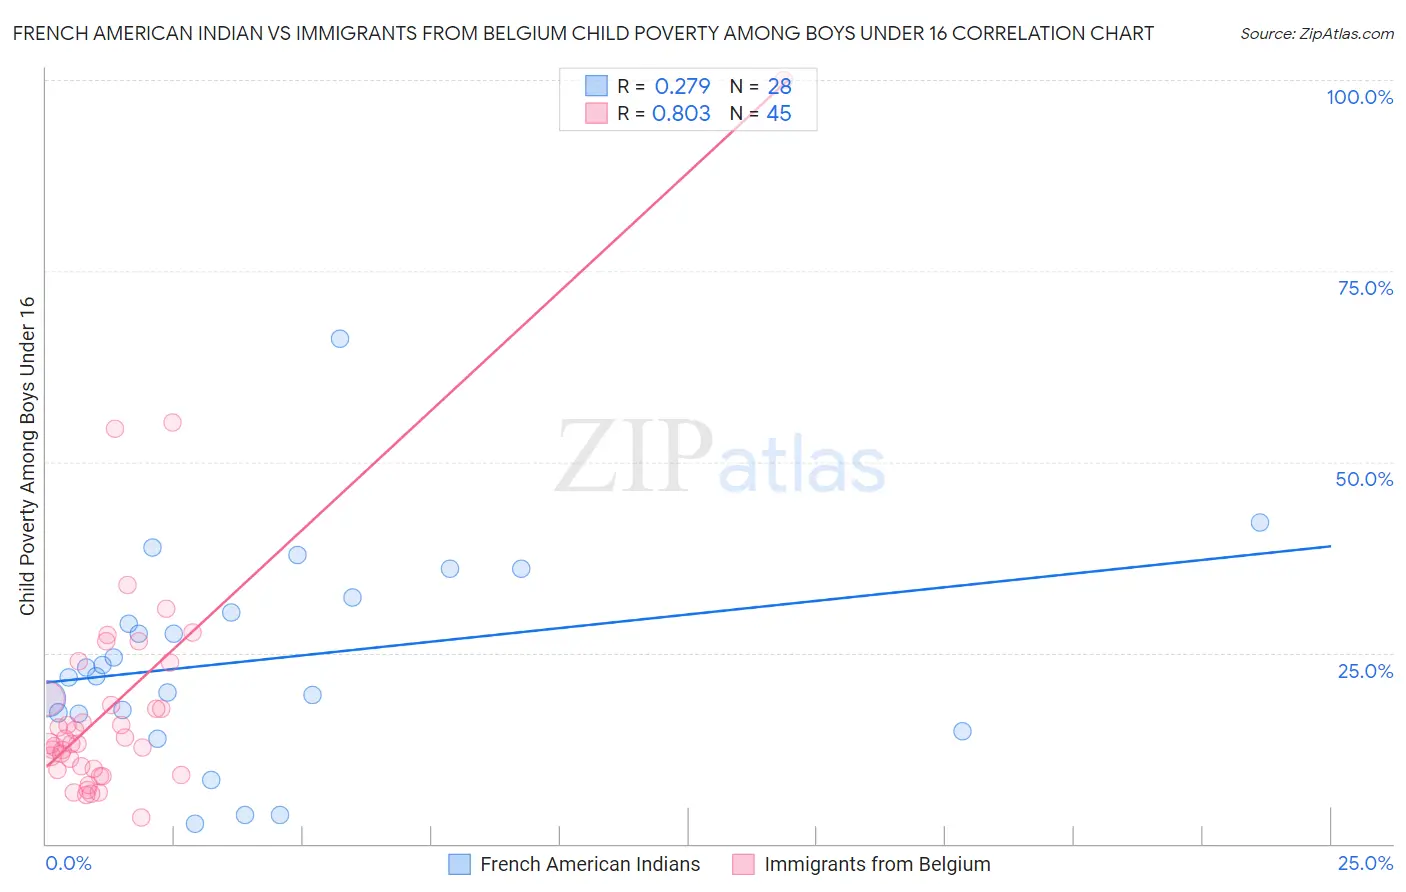 French American Indian vs Immigrants from Belgium Child Poverty Among Boys Under 16